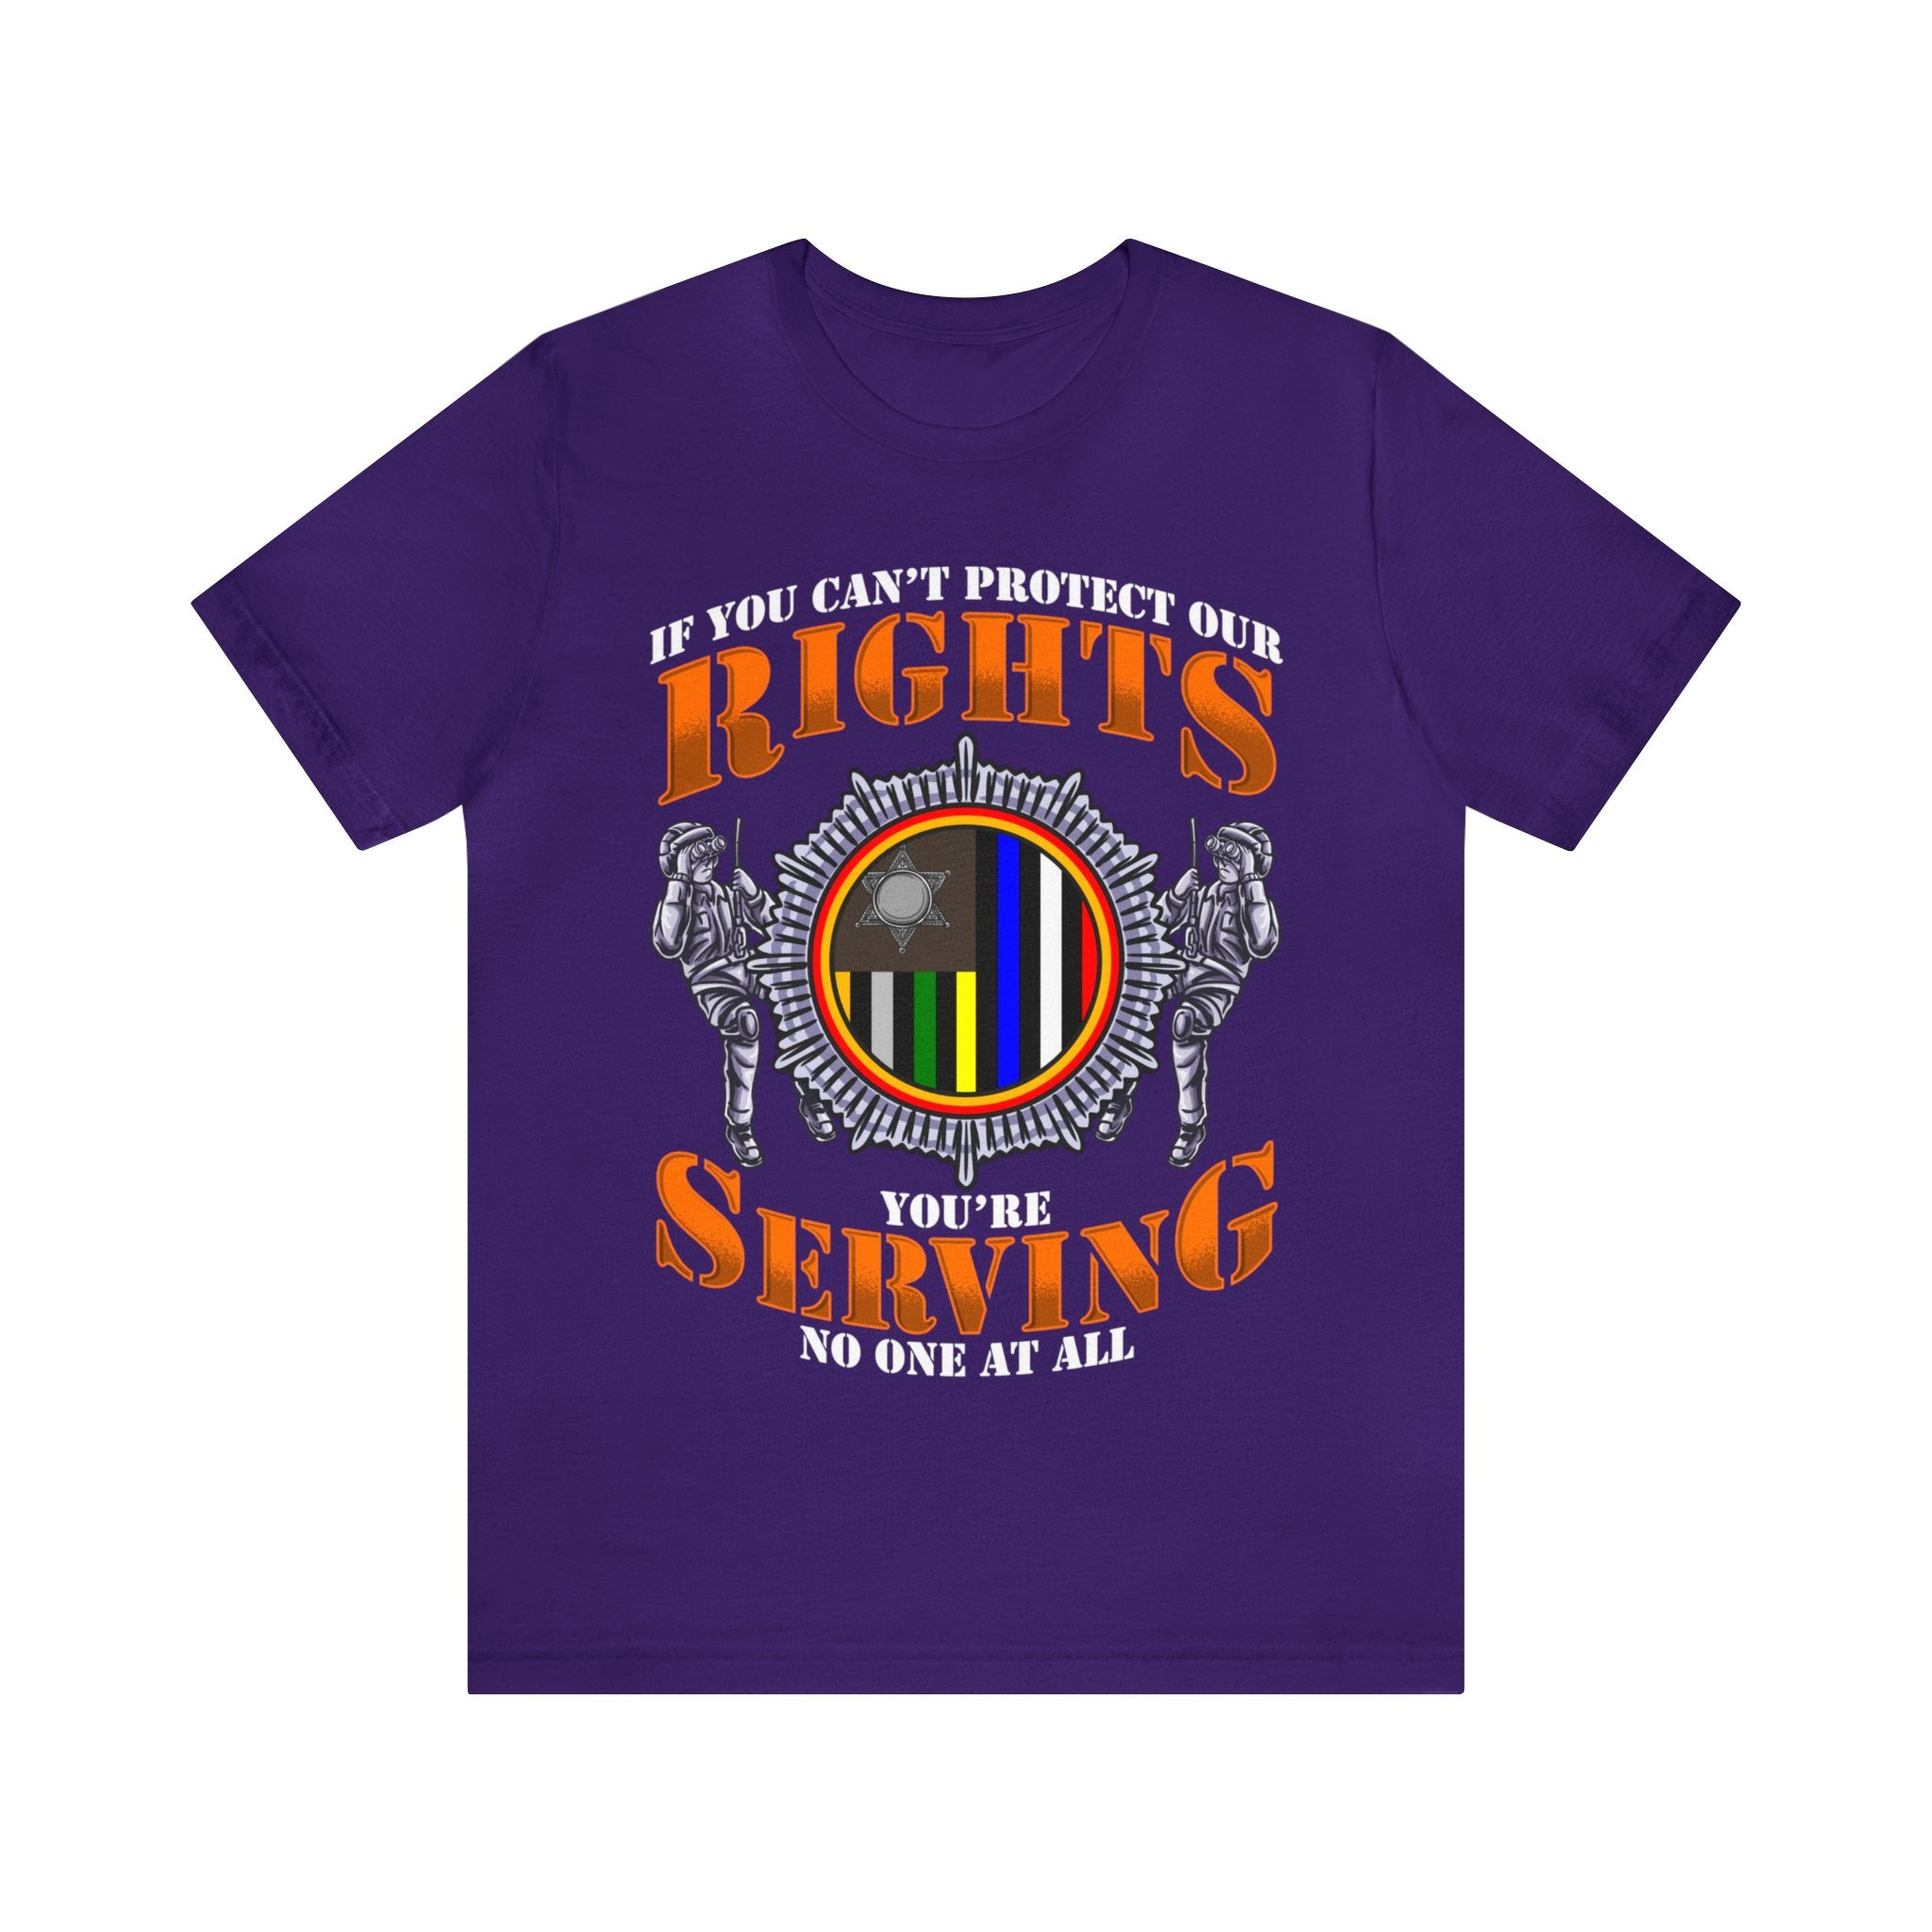 Thin Search & Rescue Line Tee - Rights/Serving